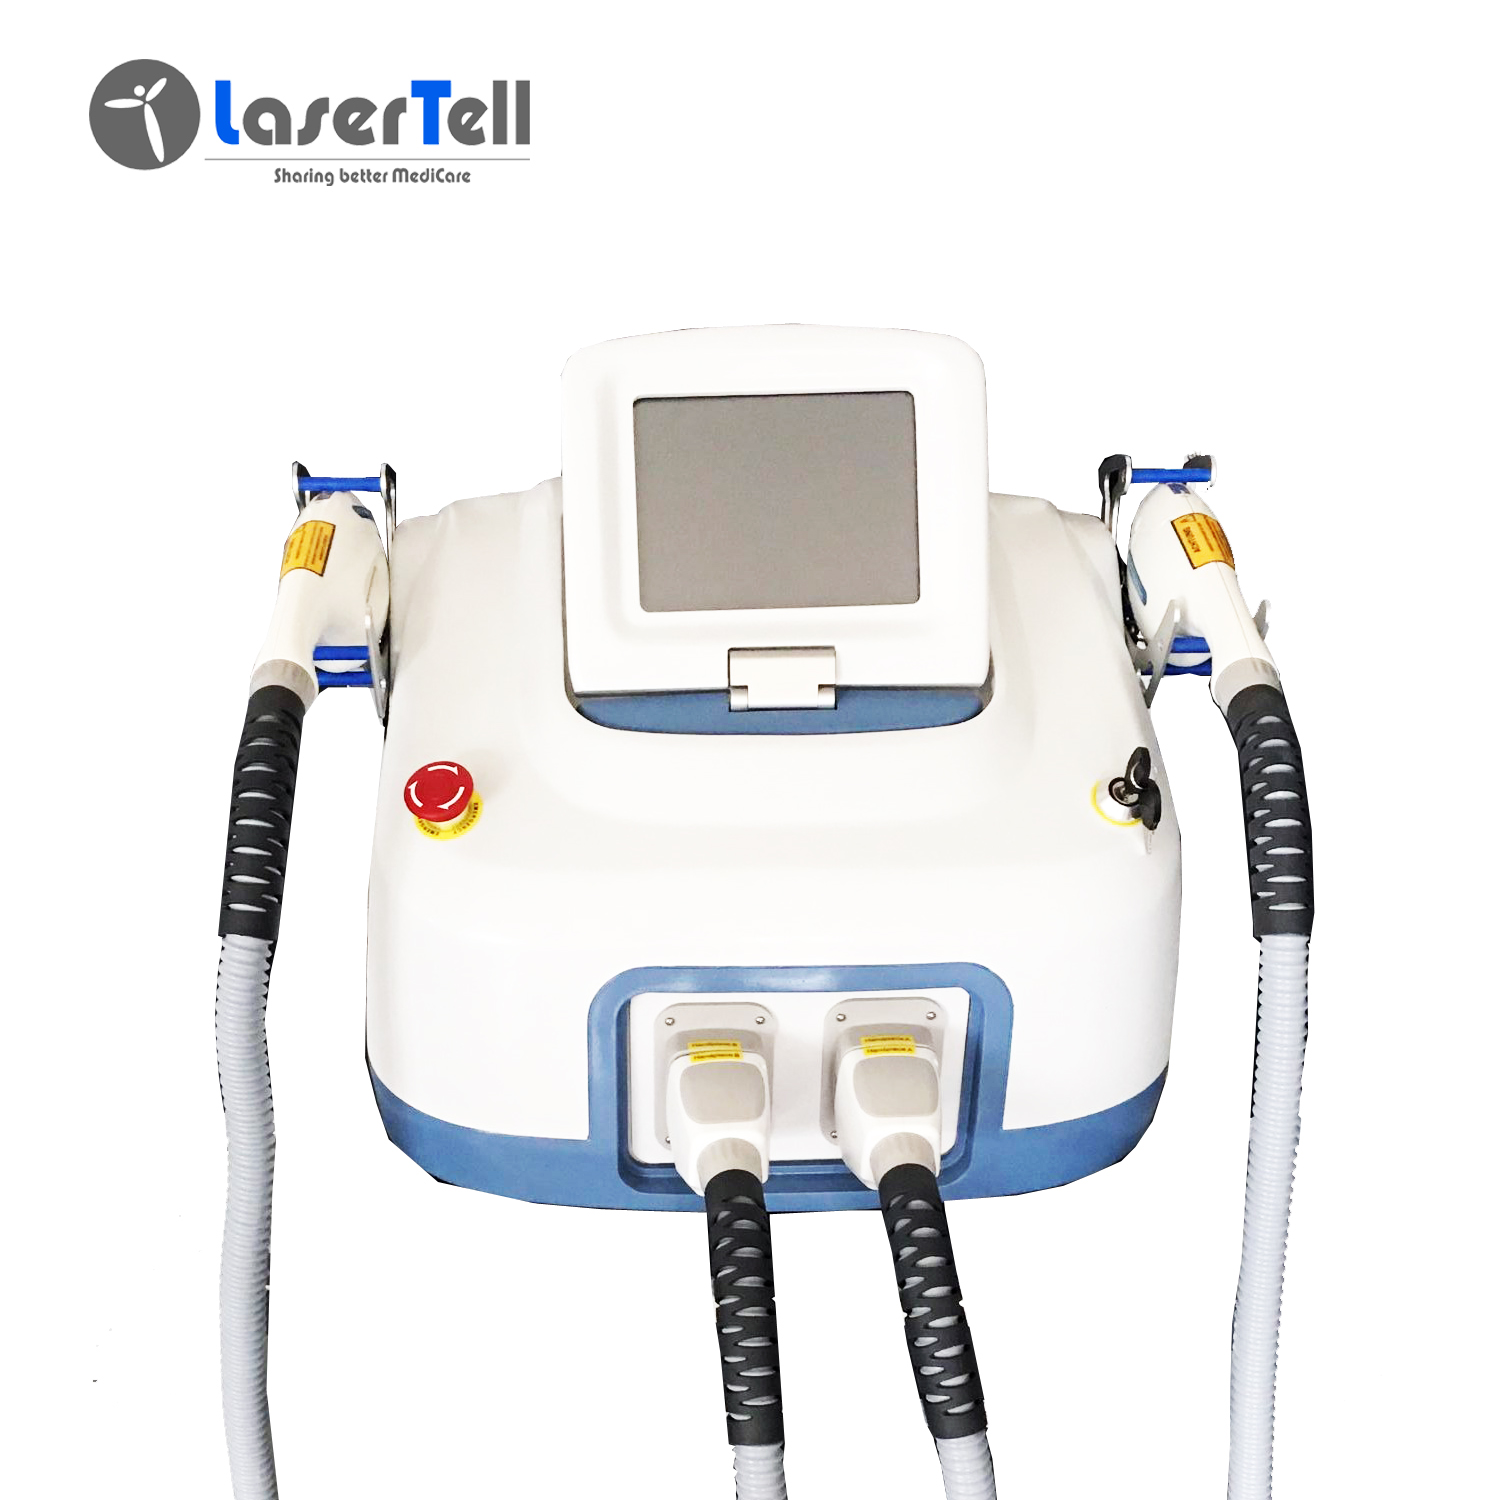 LaserTell SHR hair removal machine for sale Salon Use IPL OPT SHR Laser Hair Removal Machine in Germany